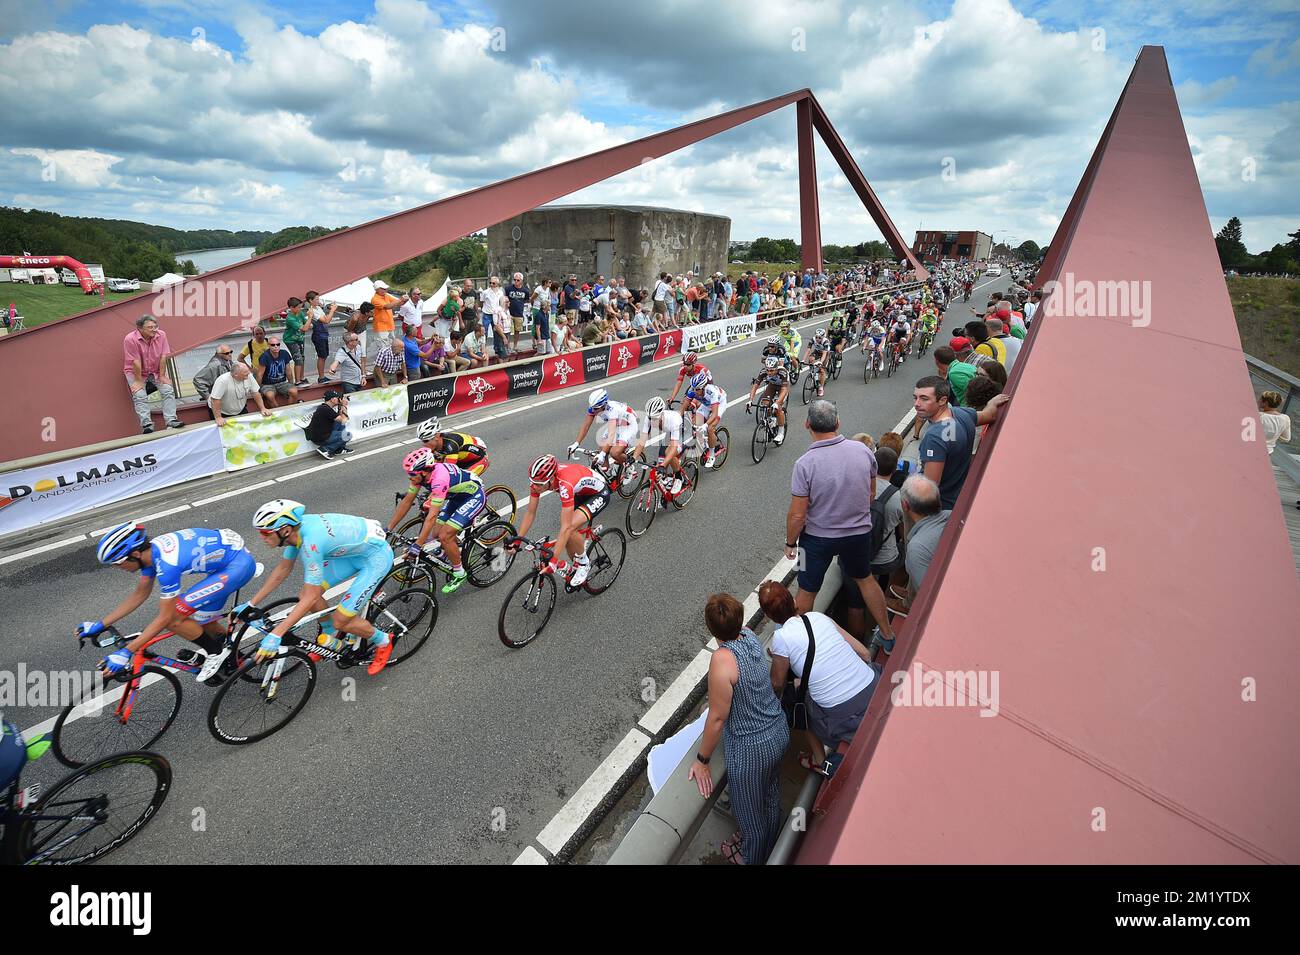 Illustration picture taken during the 5th stage of the Eneco Tour cycling race, 179,6 km from Riemst to Sittard-Geleen, Friday 14 August 2015, The Netherlands.  Stock Photo